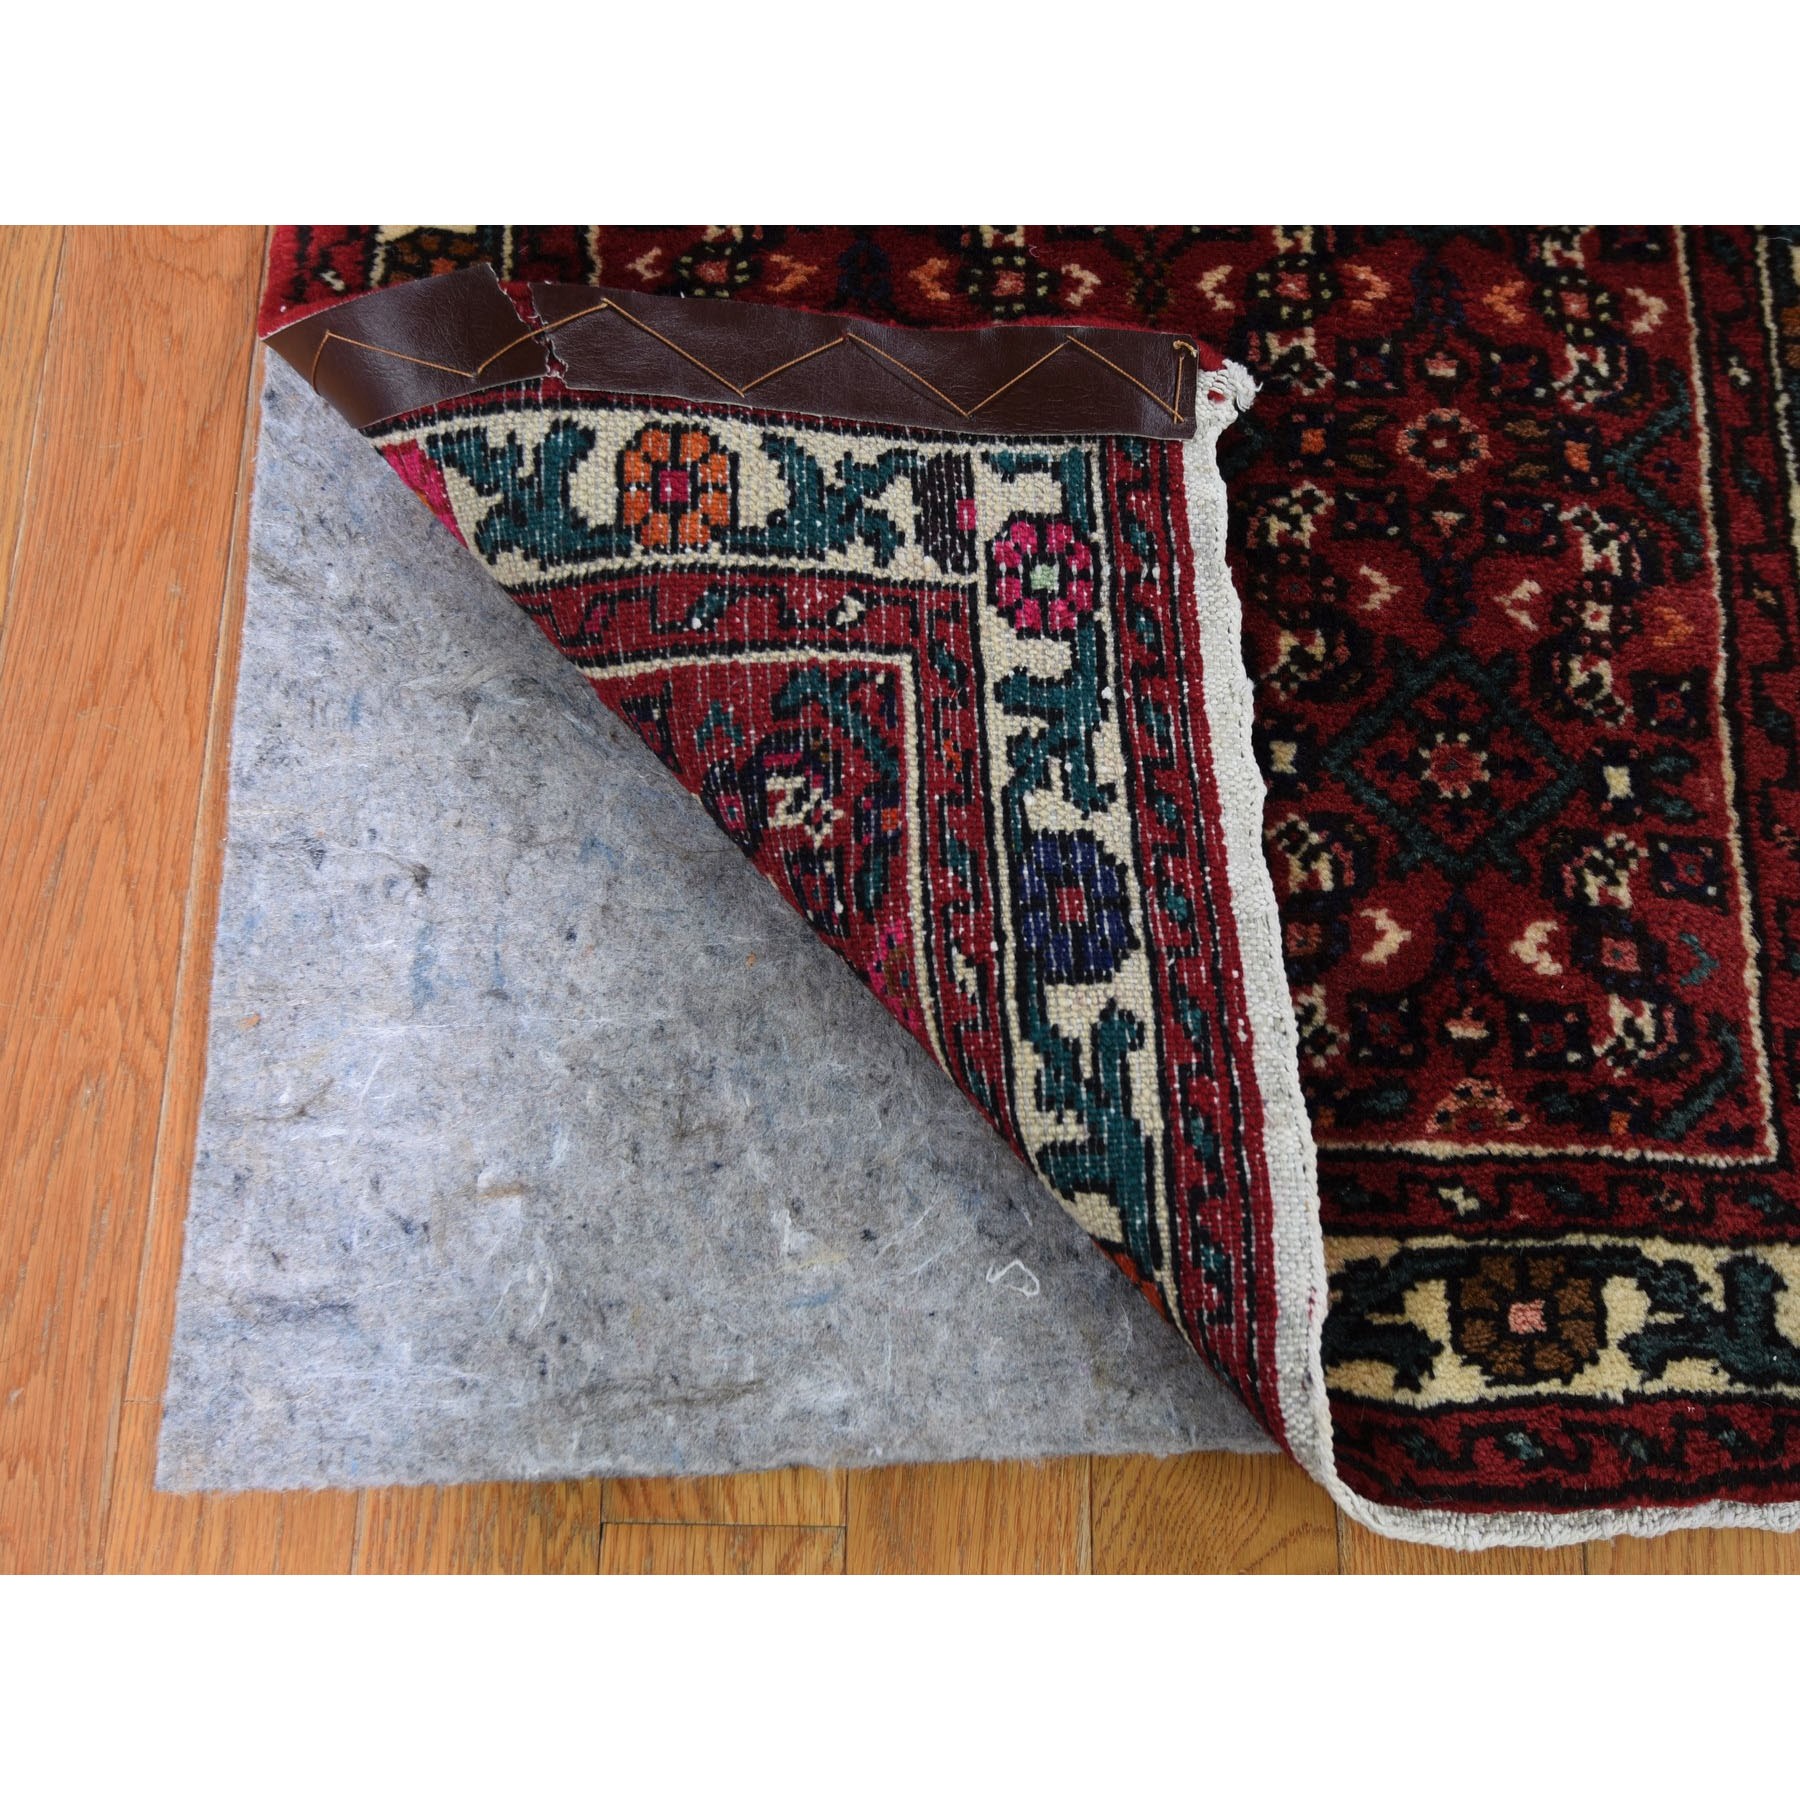 2-3 x12-9  Red New Persian Hamadan Pure Wool Narrow Runner Hand Knotted Oriental Rug 